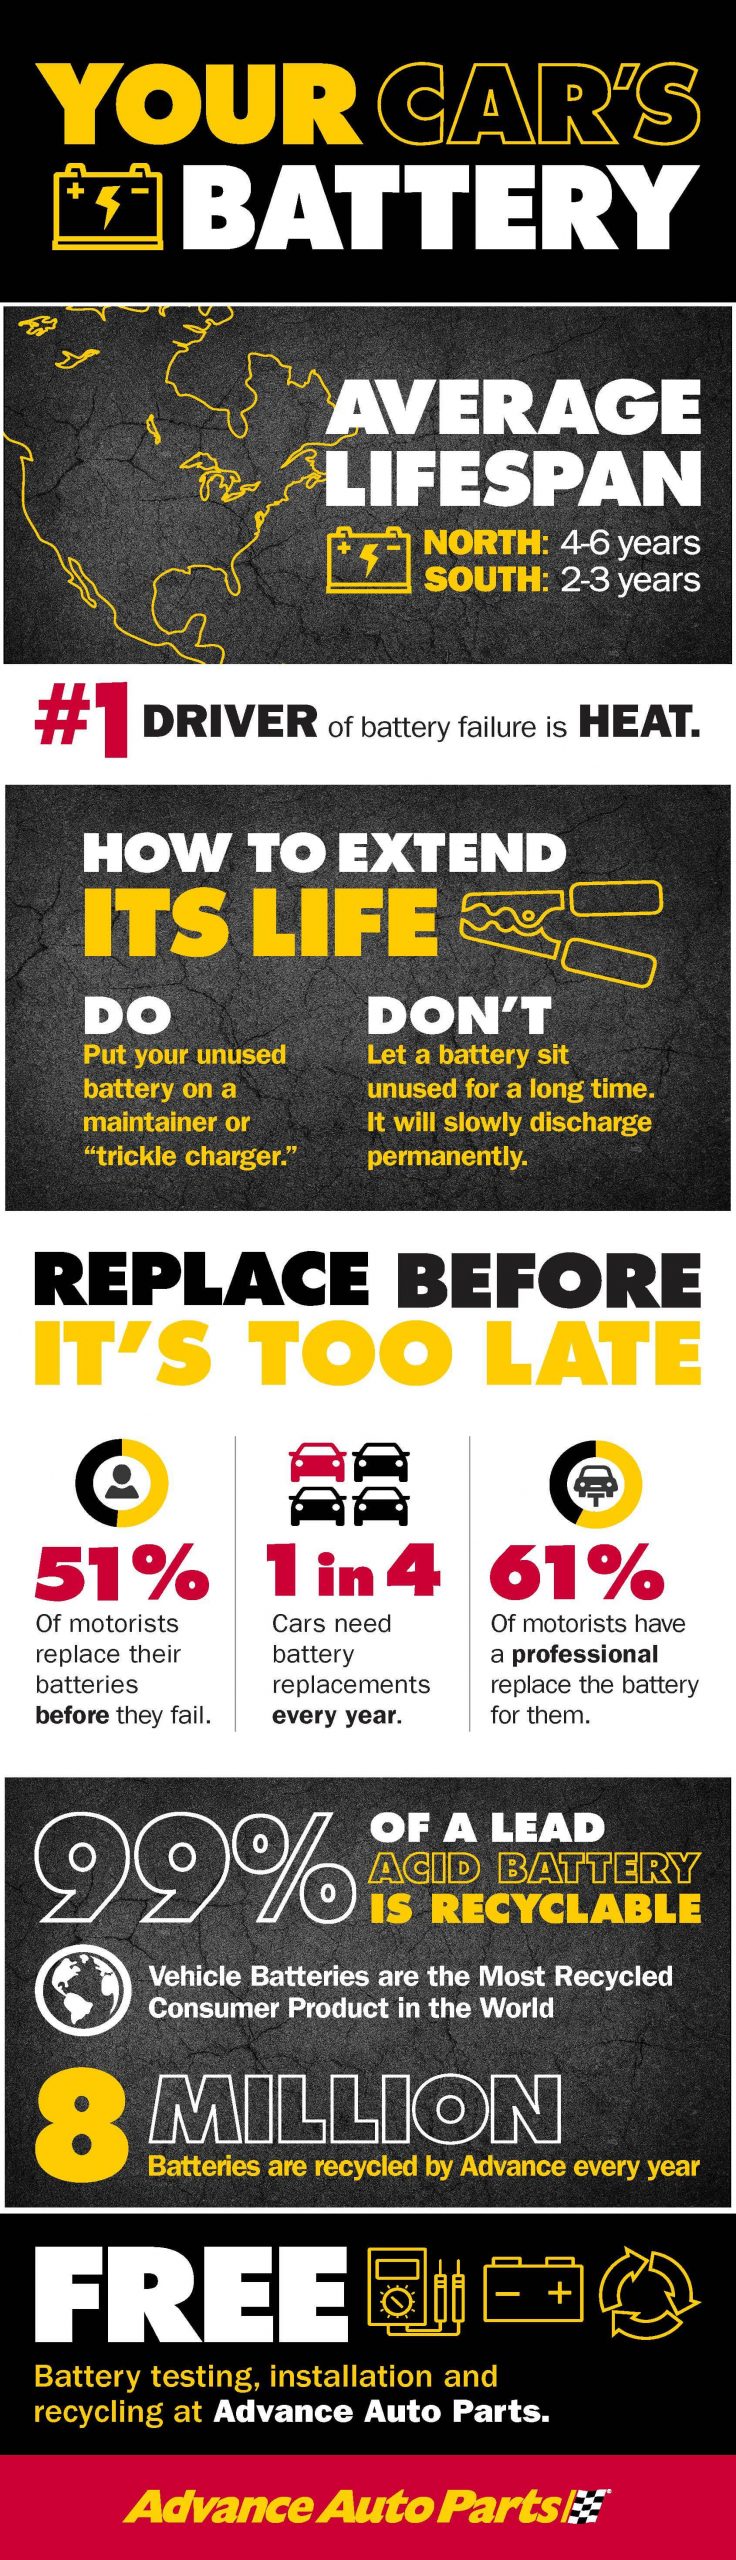 car battery facts infographic